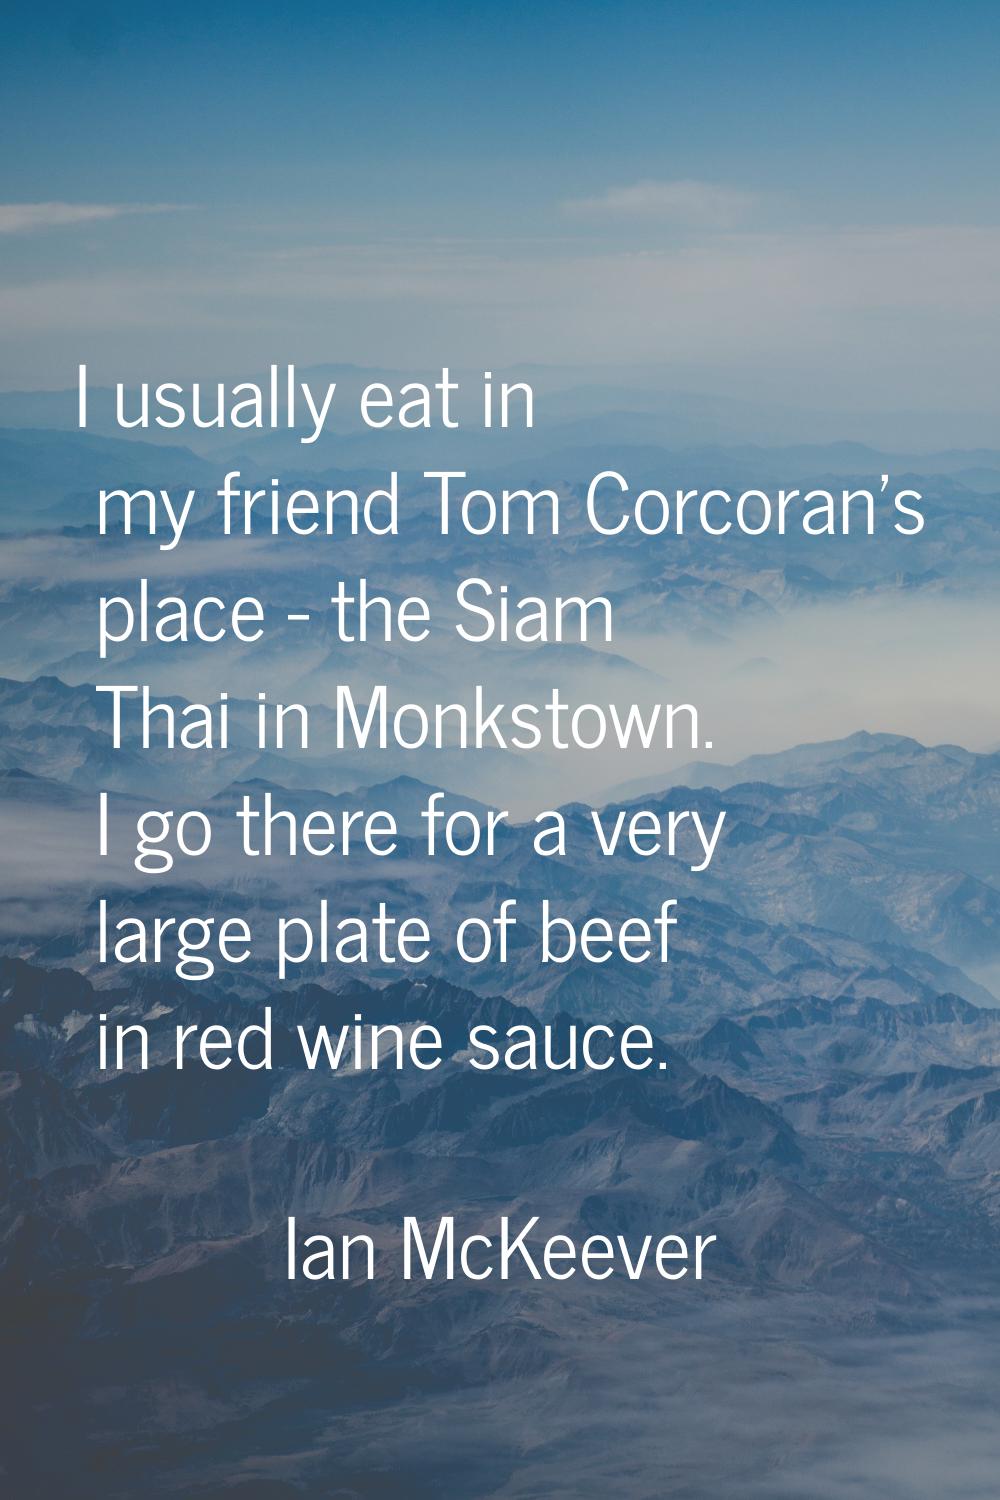 I usually eat in my friend Tom Corcoran's place - the Siam Thai in Monkstown. I go there for a very